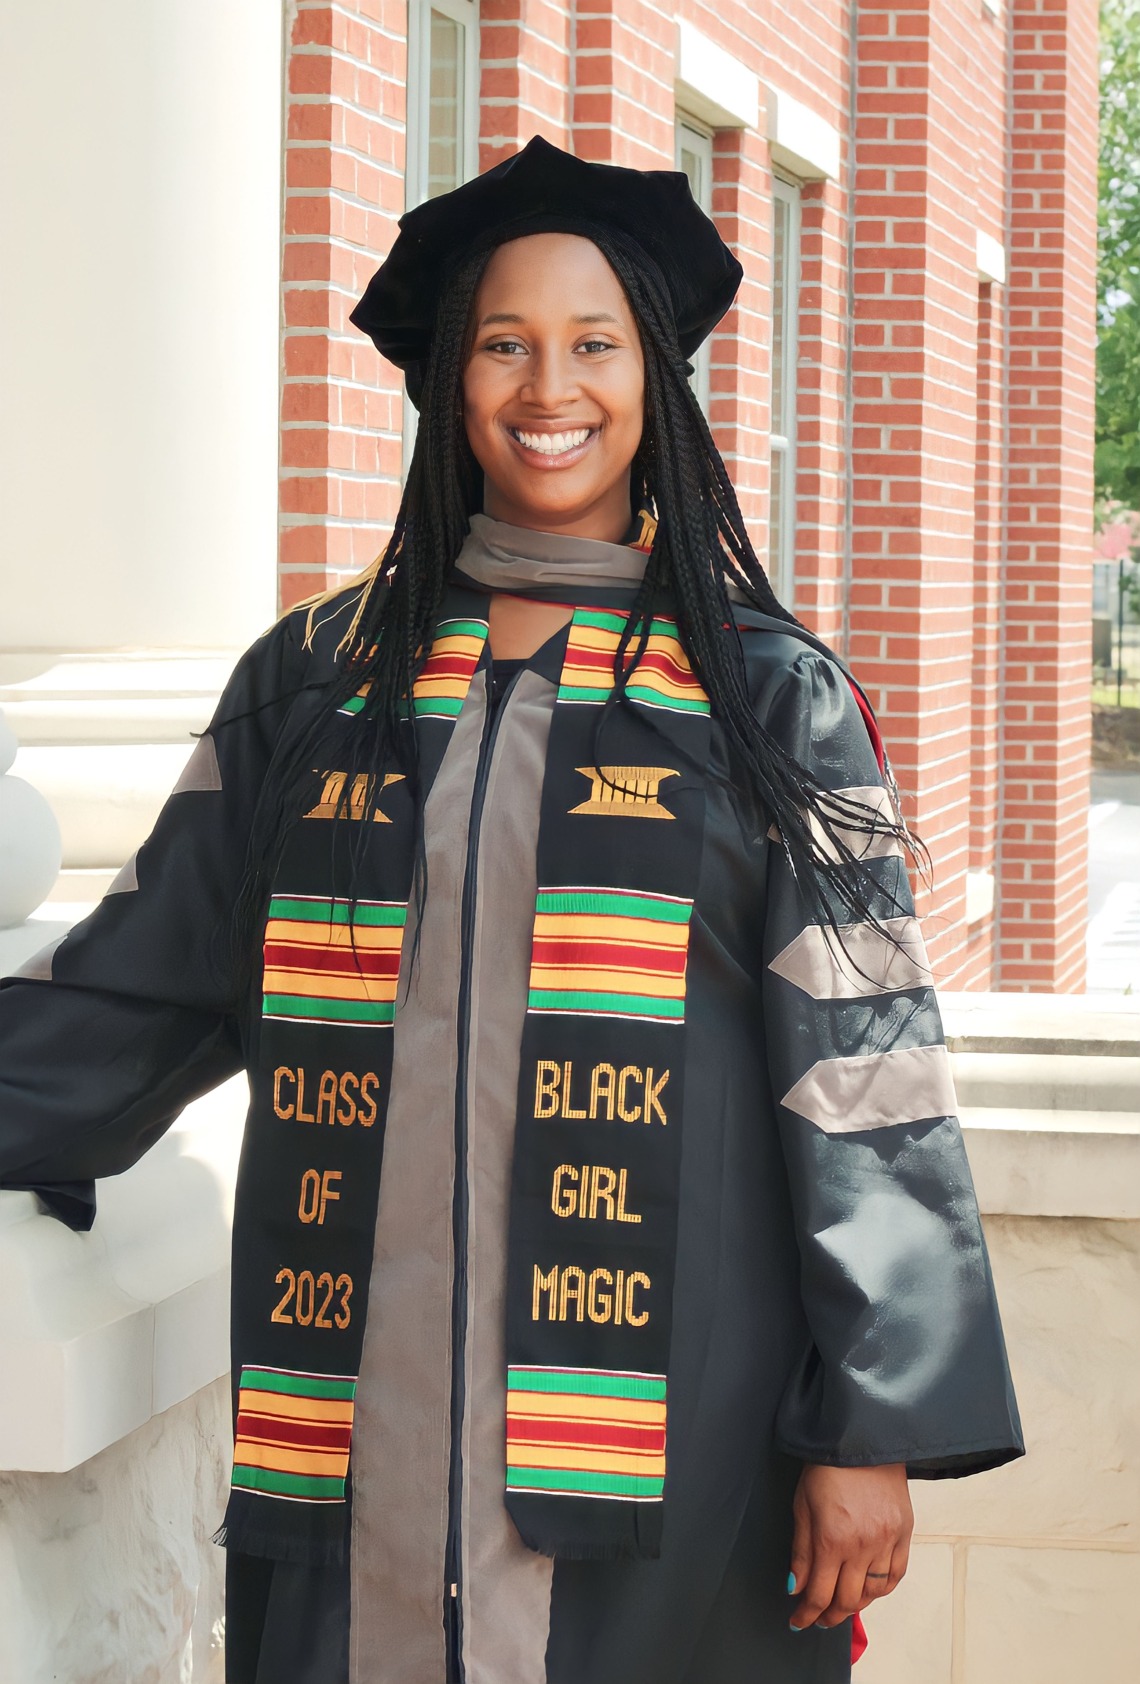 Jasmine Worthy wears graduation regalia and a graduation stole that reads "Class of 2023" and "Black Girl Magic."